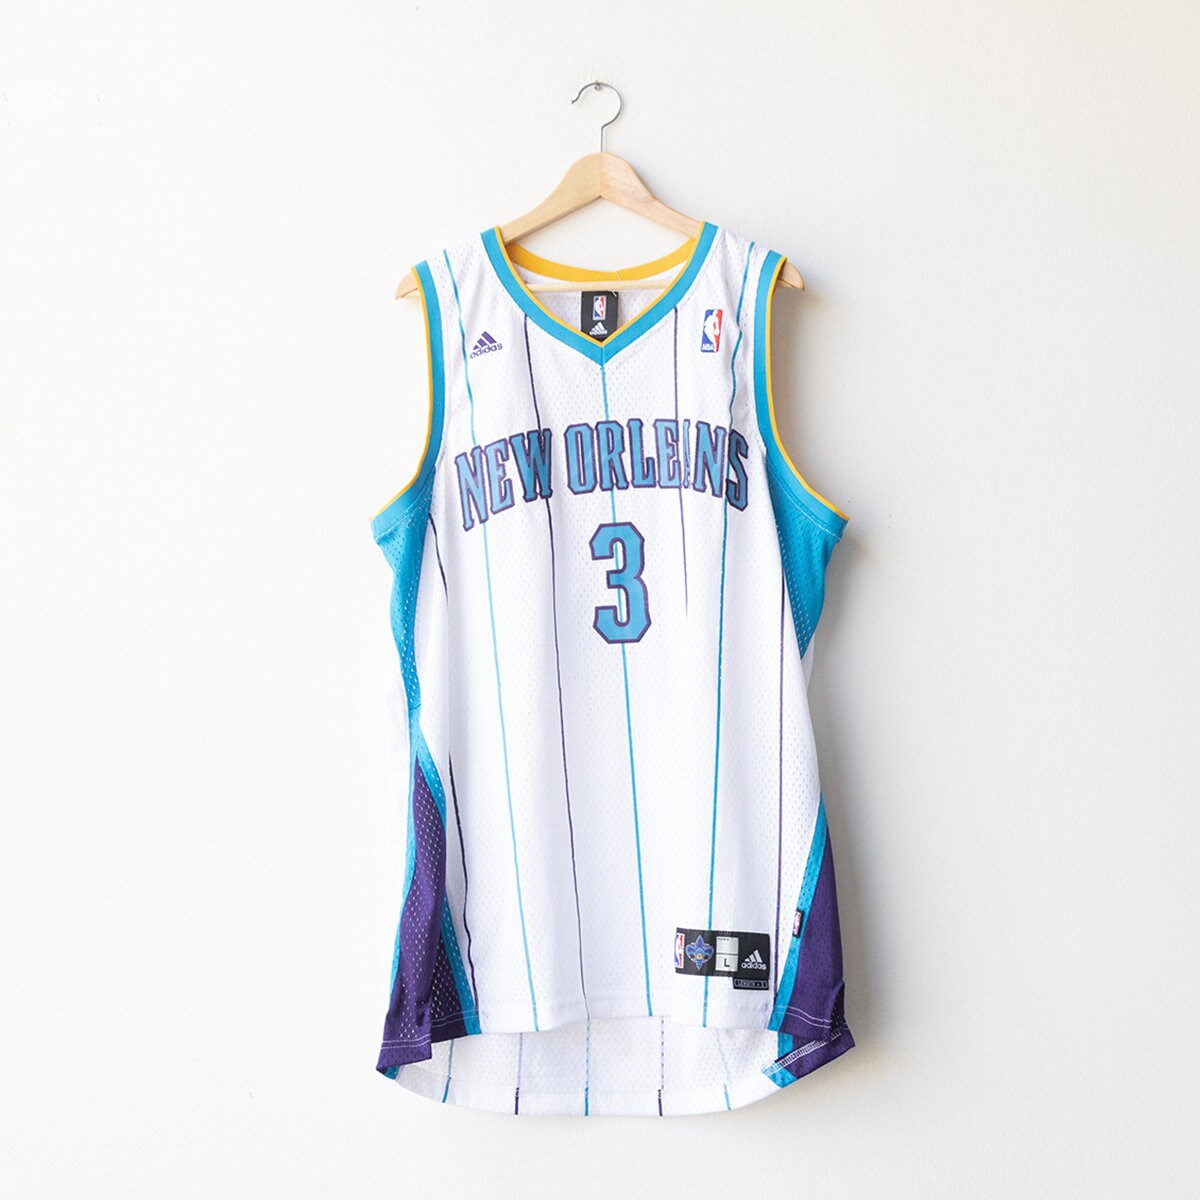 Adidas Chris Paul New Orleans Hornets Jersey - 5 Star Vintage